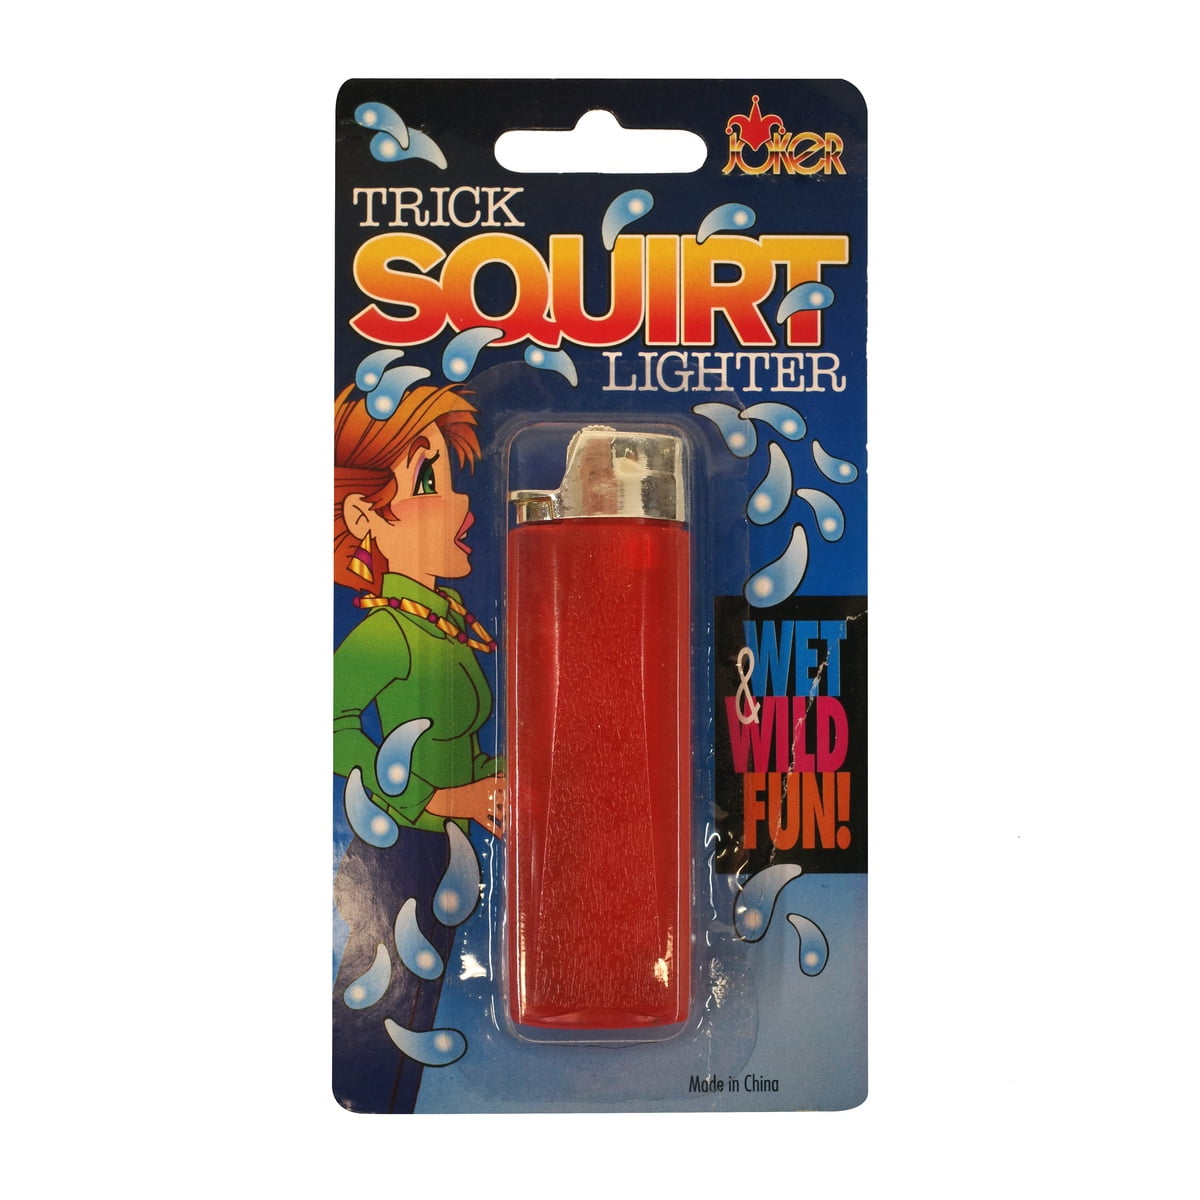 1Pc funny party trick gag gift water squirting lighter joke prank trick toy_cx 